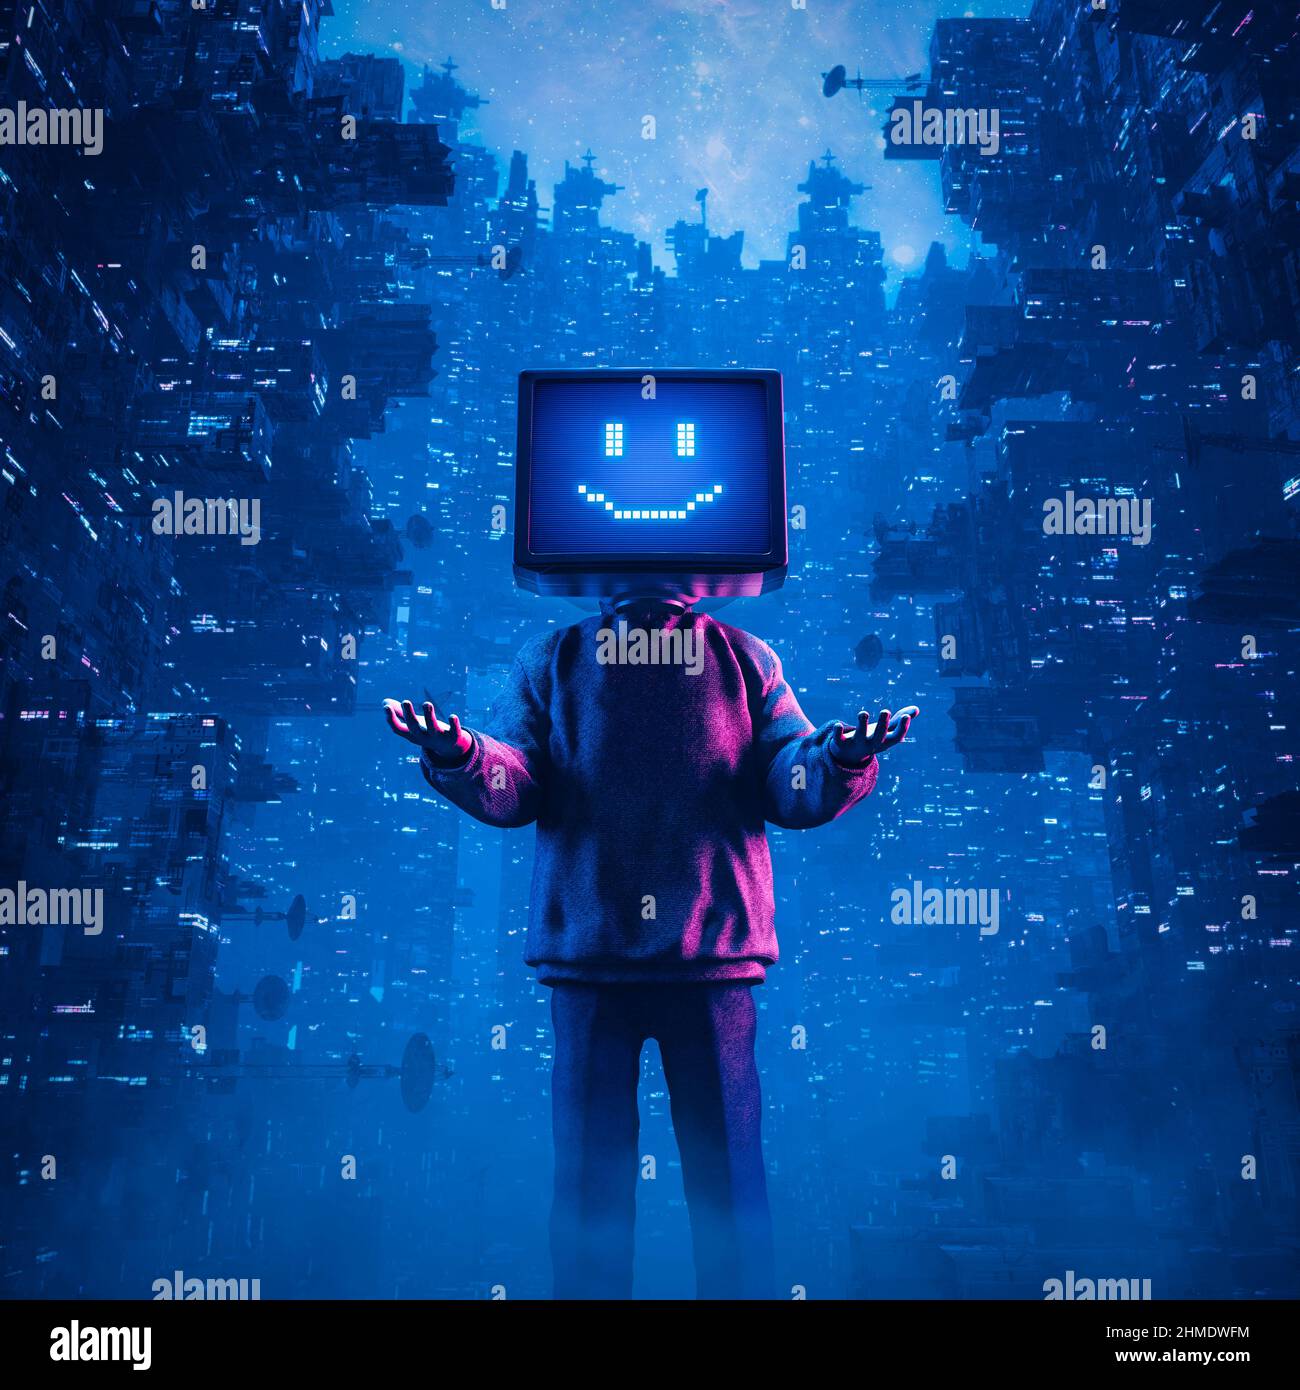 Gamer monitor head smiley media concept - 3D illustration of hoodie wearing character with smiling computer display face standing in futuristic city Stock Photo